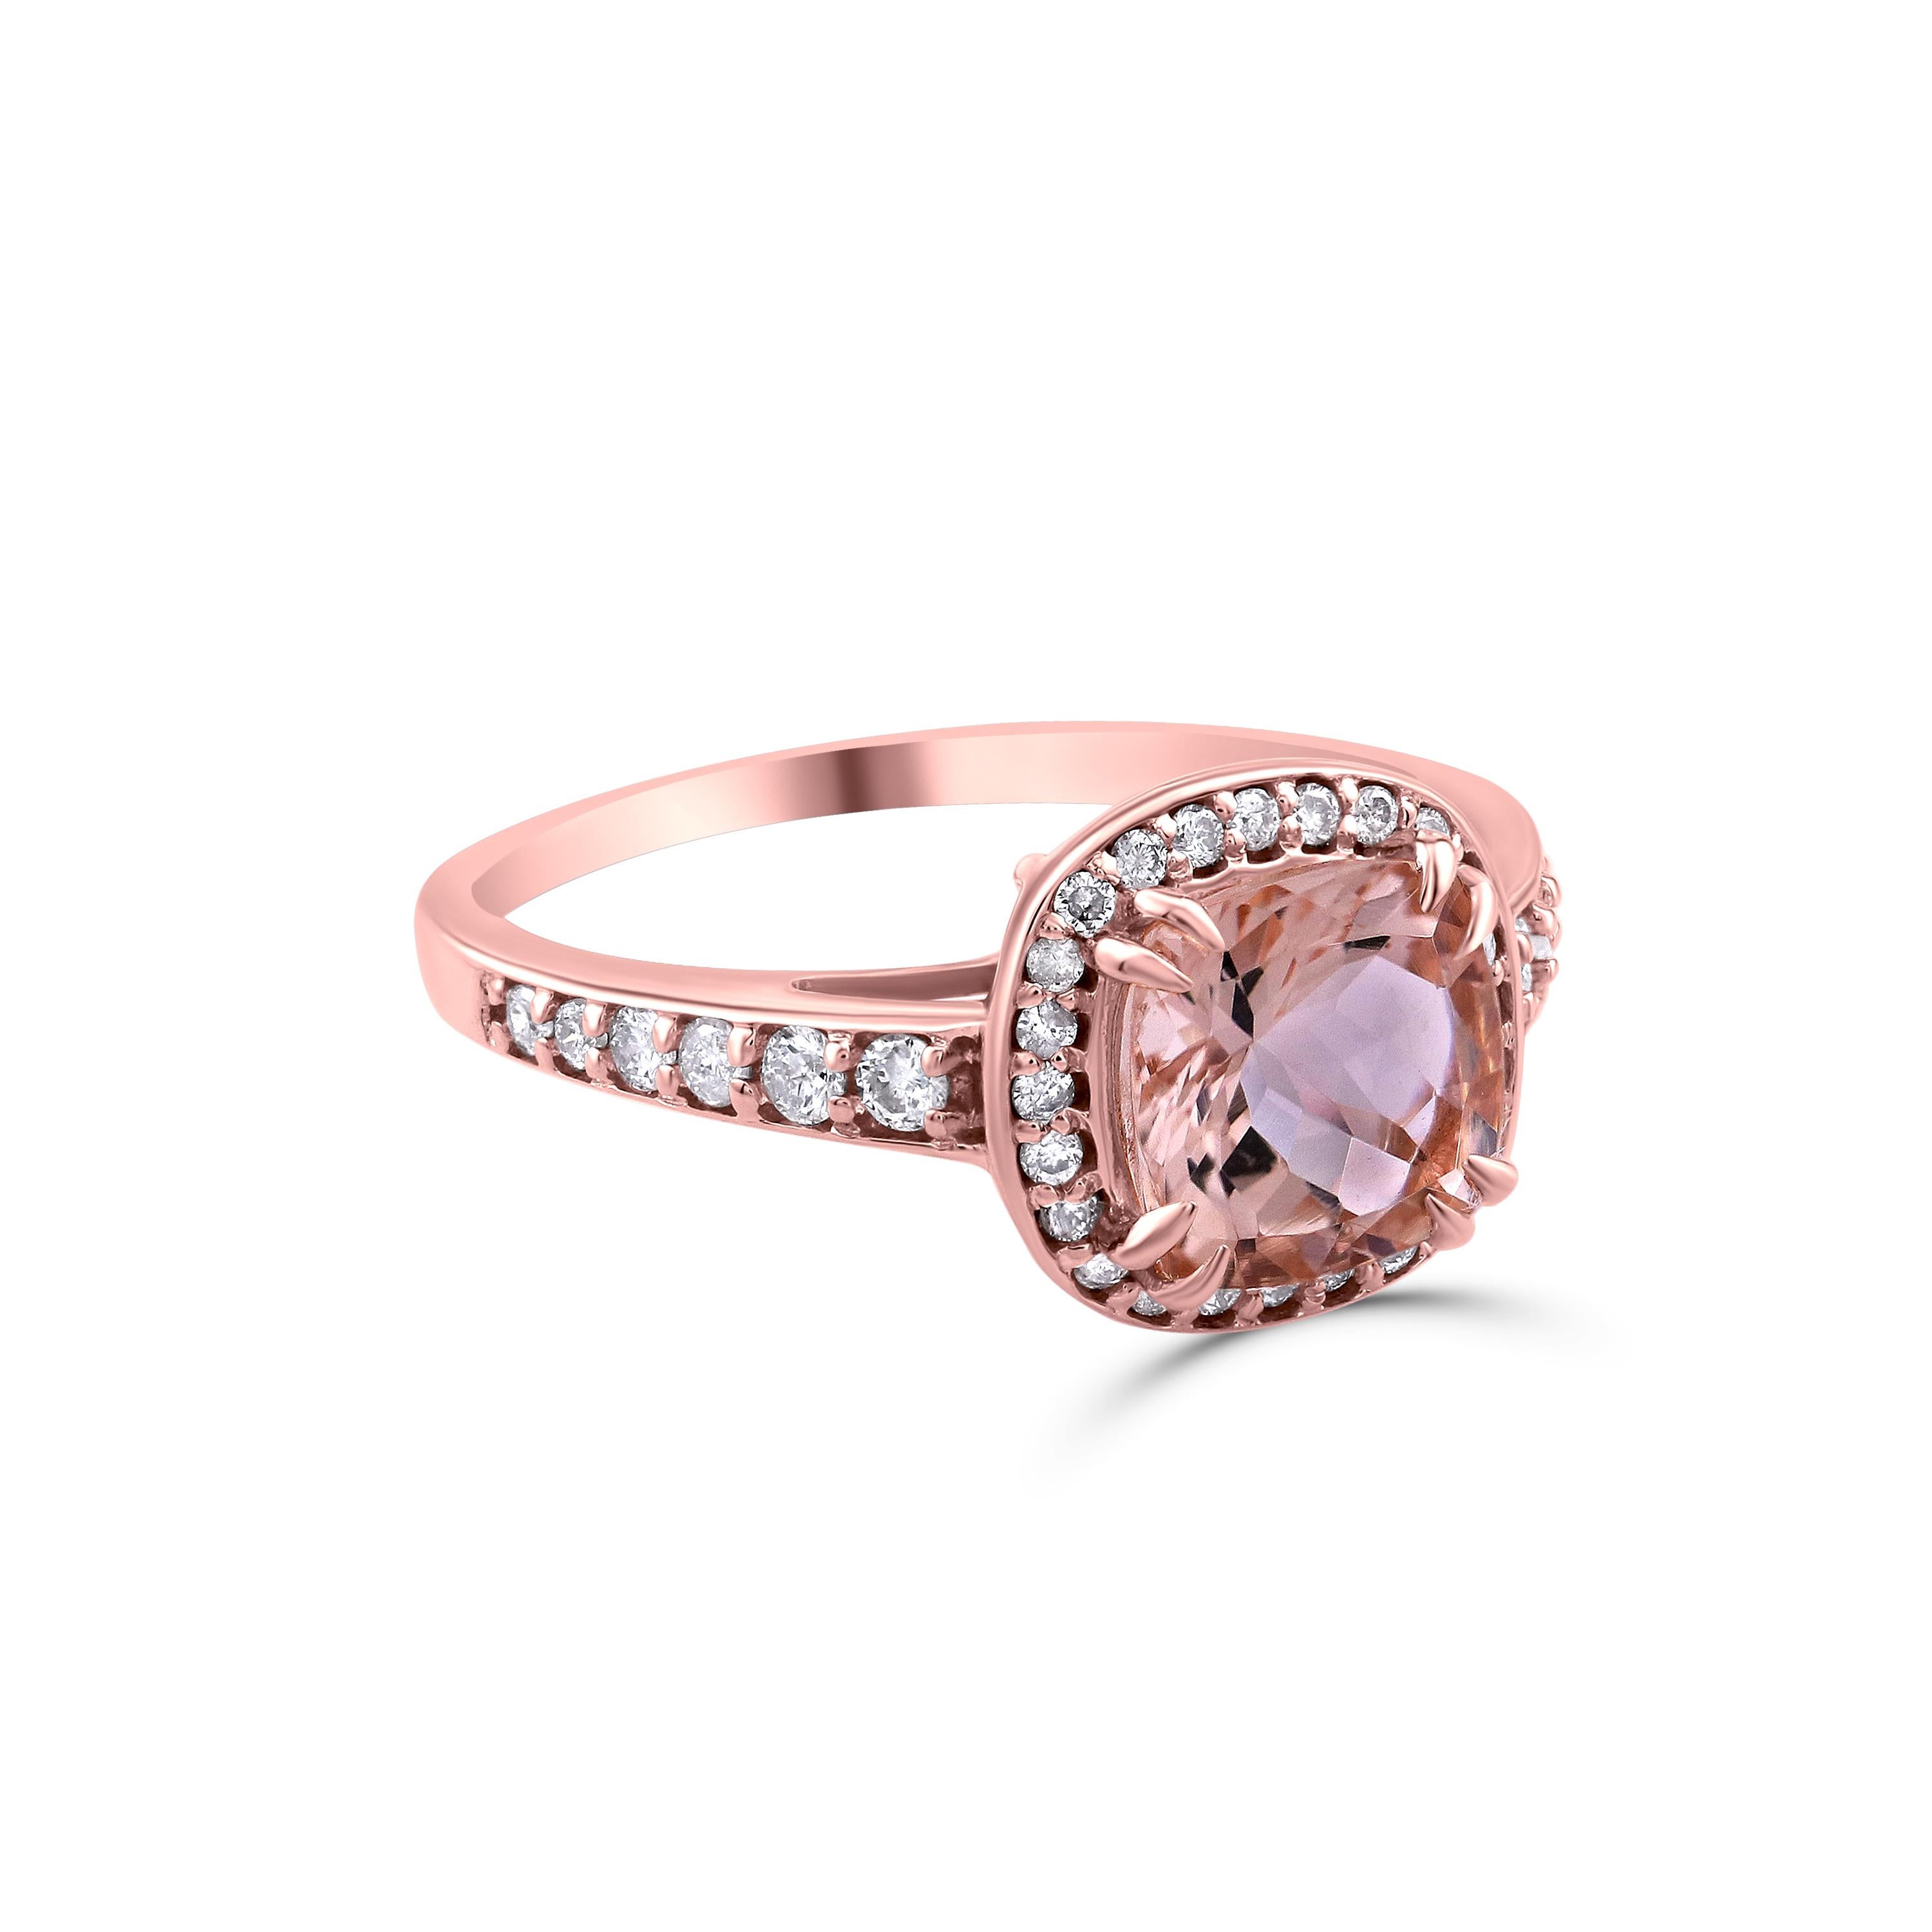 Contemporary Gemistry 1.4 Carat Cushion Morganite Halo Solitaire Diamond Ring in 14K Gold For Sale